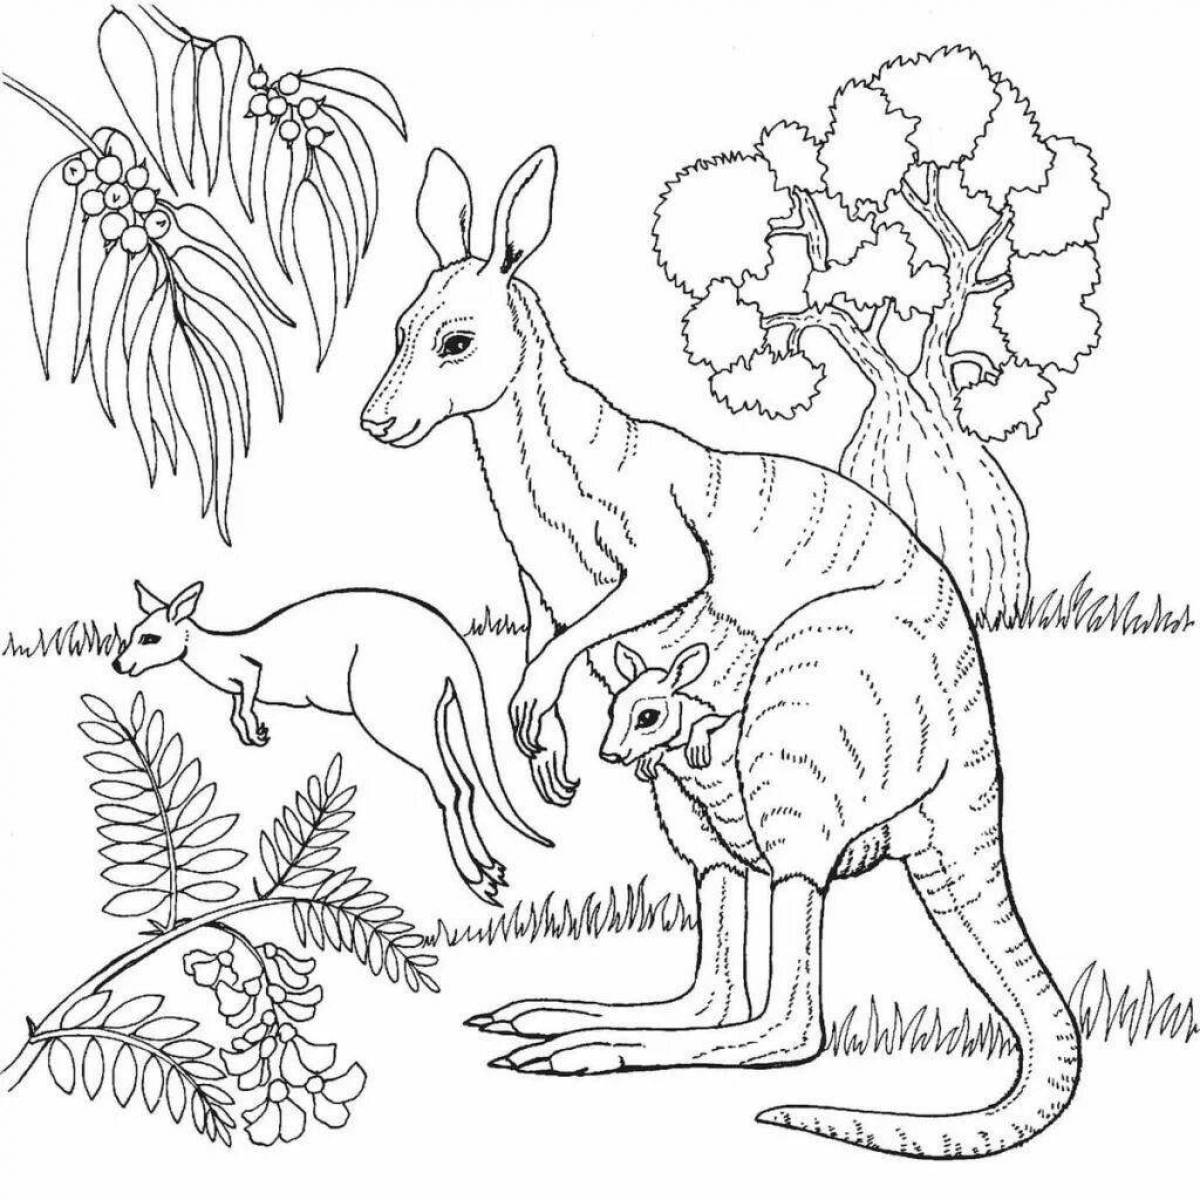 Fantastic coloring pages for children 7 years old animals of hot countries